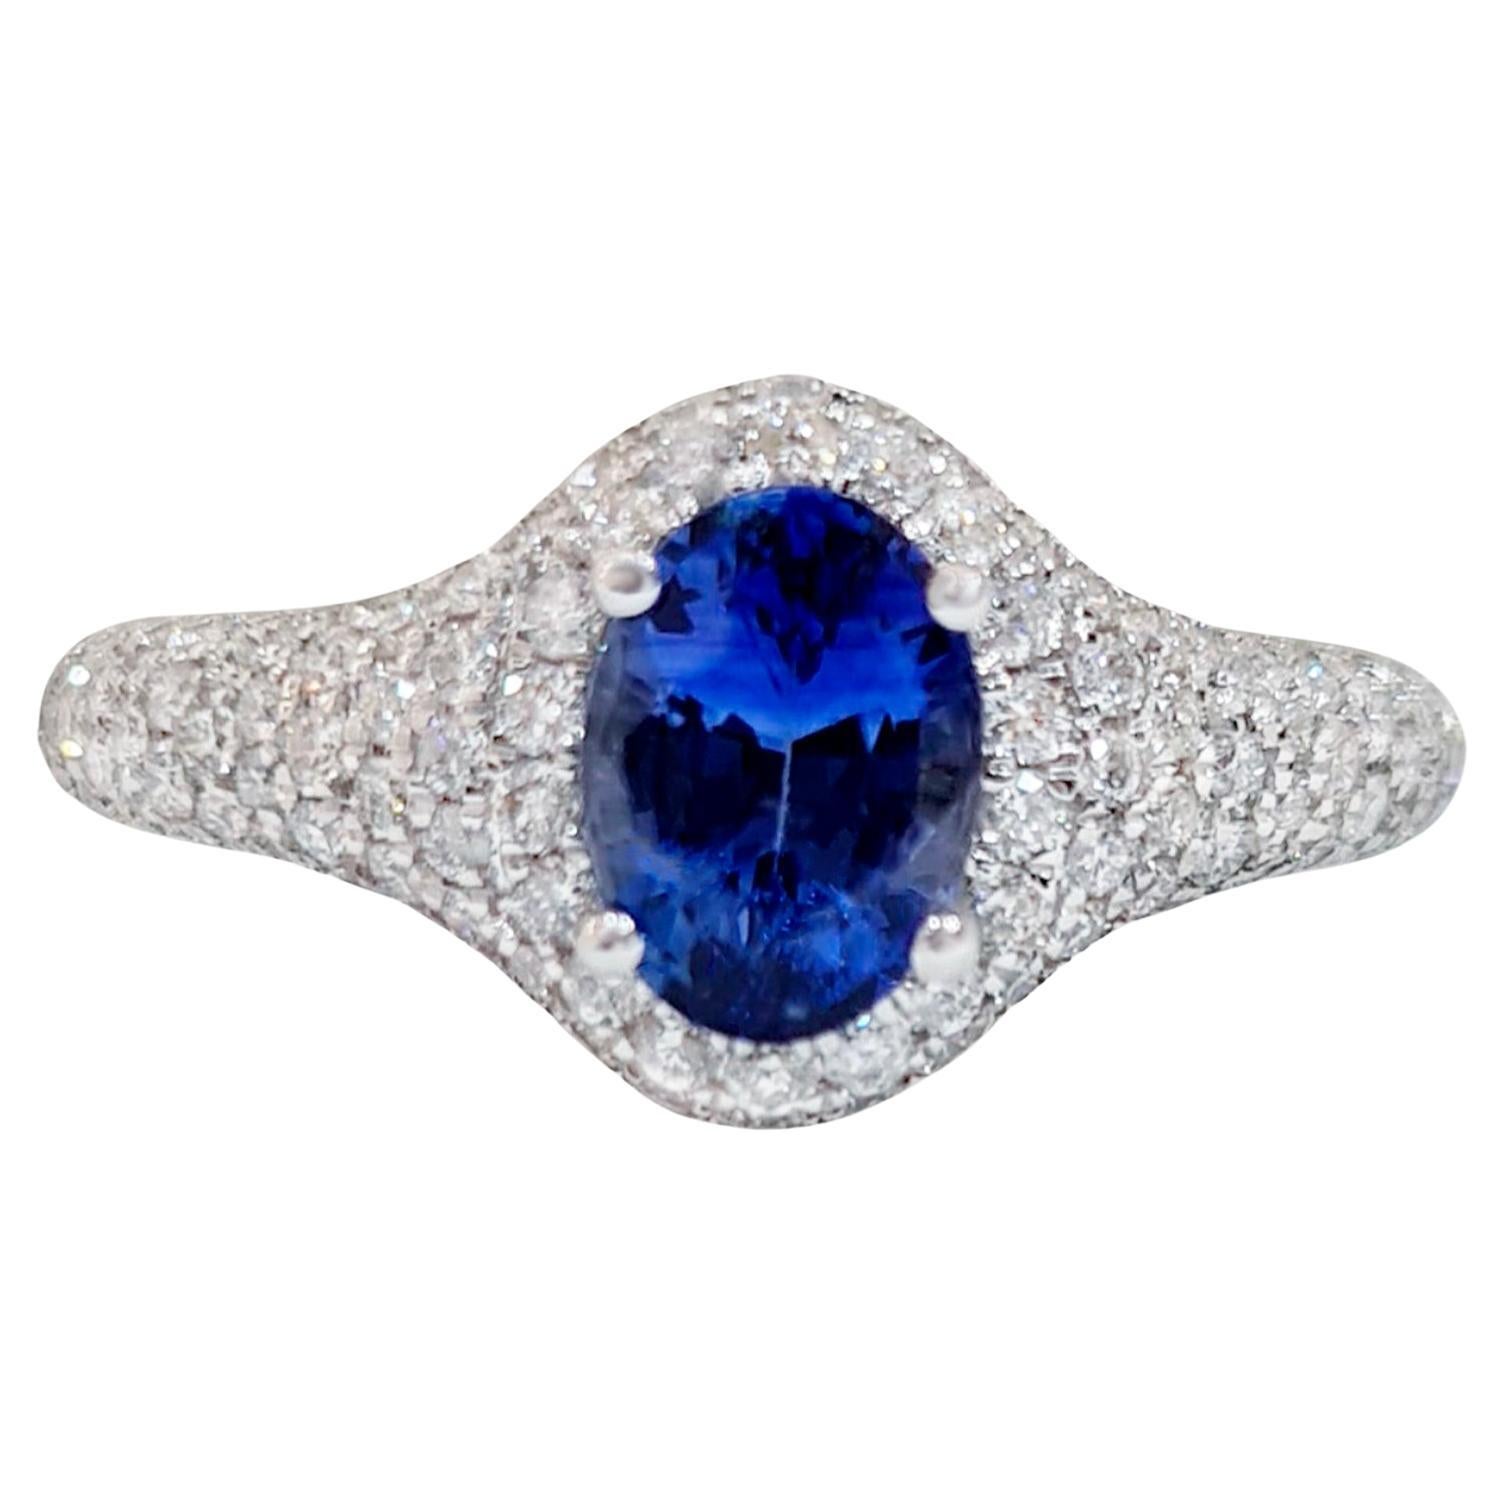 Blue Sapphire Ring With White Diamonds 1.83 Carats 18K White Gold